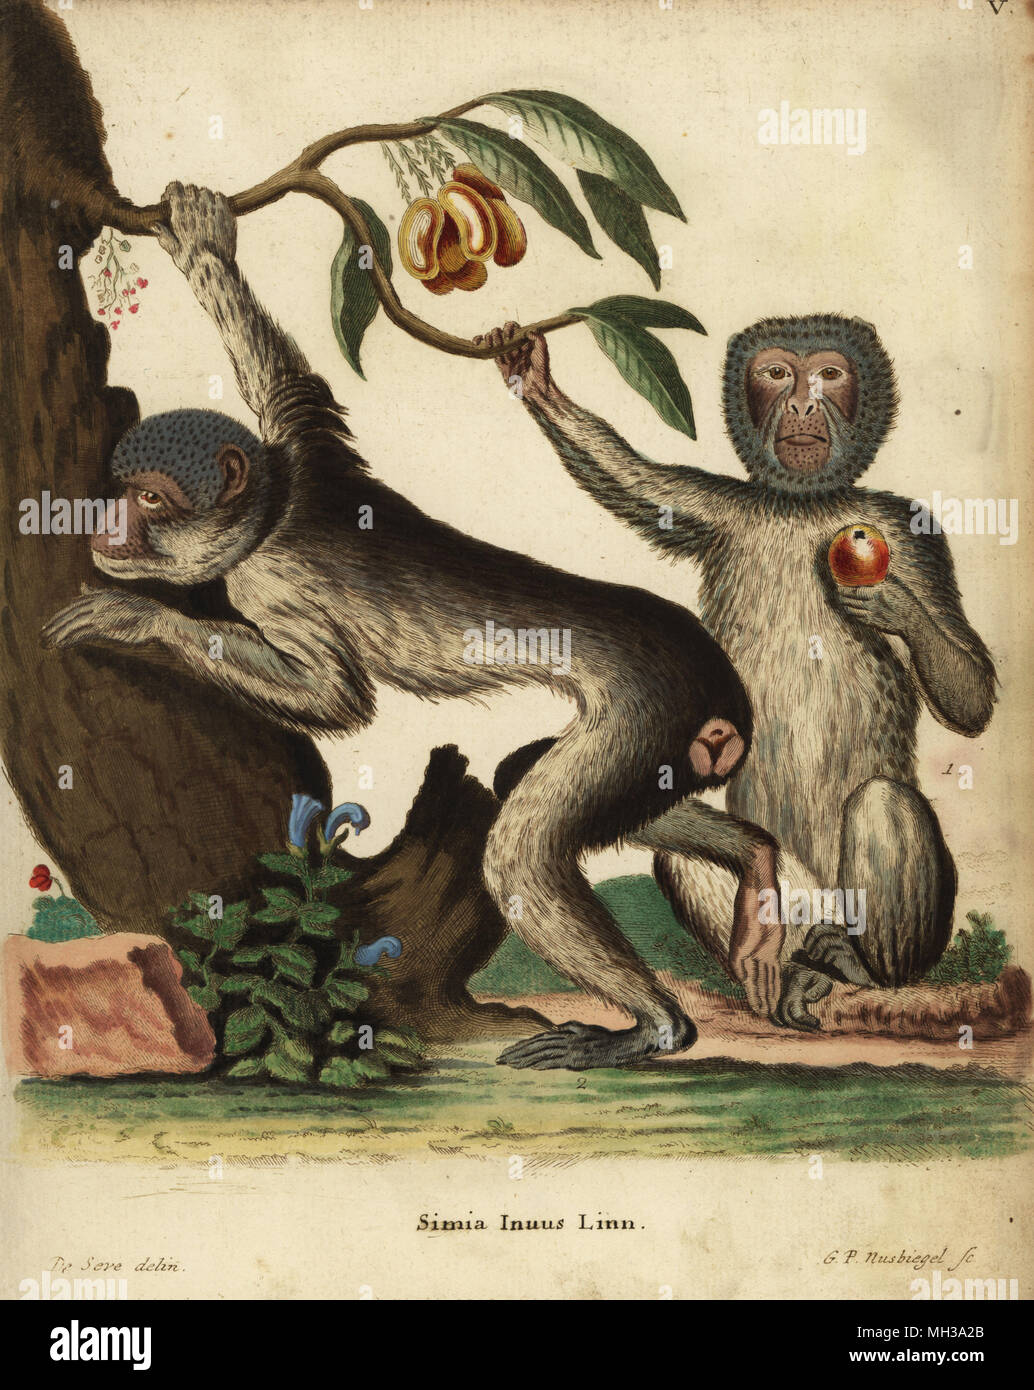 Barbary ape or macaque, Macaca sylvanus. Endangered. Simia inuus Linn. Handcoloured copperplate engraving by Georg Paul Nussbiegel after an illustration by Jacques de Seve from Johann Christian Daniel Schreber's Animal Illustrations after Nature, or Schreber's Fantastic Animals, Erlangen, Germany, 1775. Stock Photo